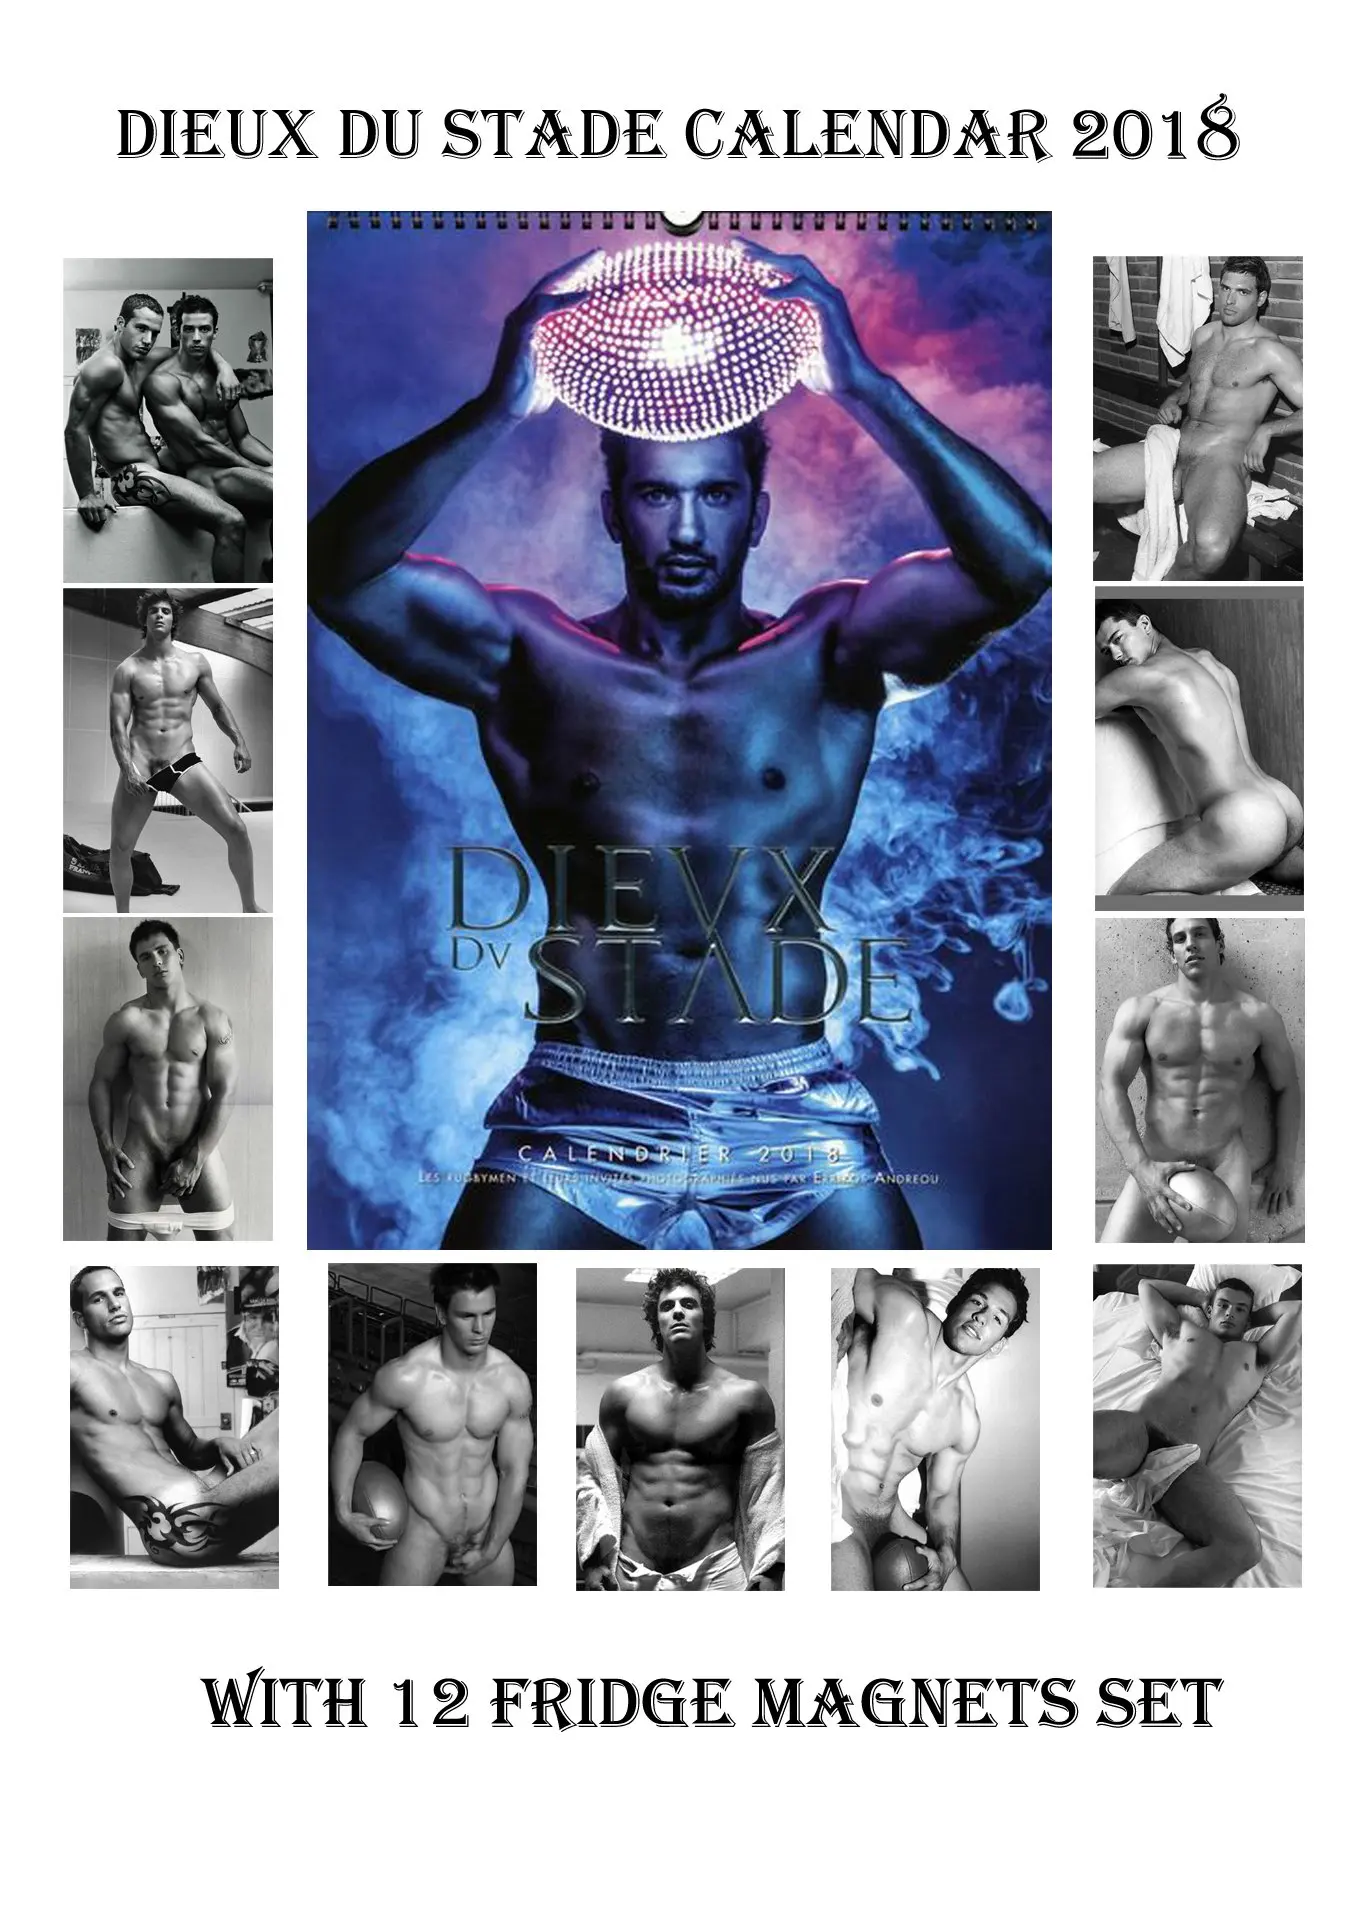 Buy THE FRENCH RUGBY TEAM LOCKER ROOM NUDES DIEUX DU STADE OFFICIAL